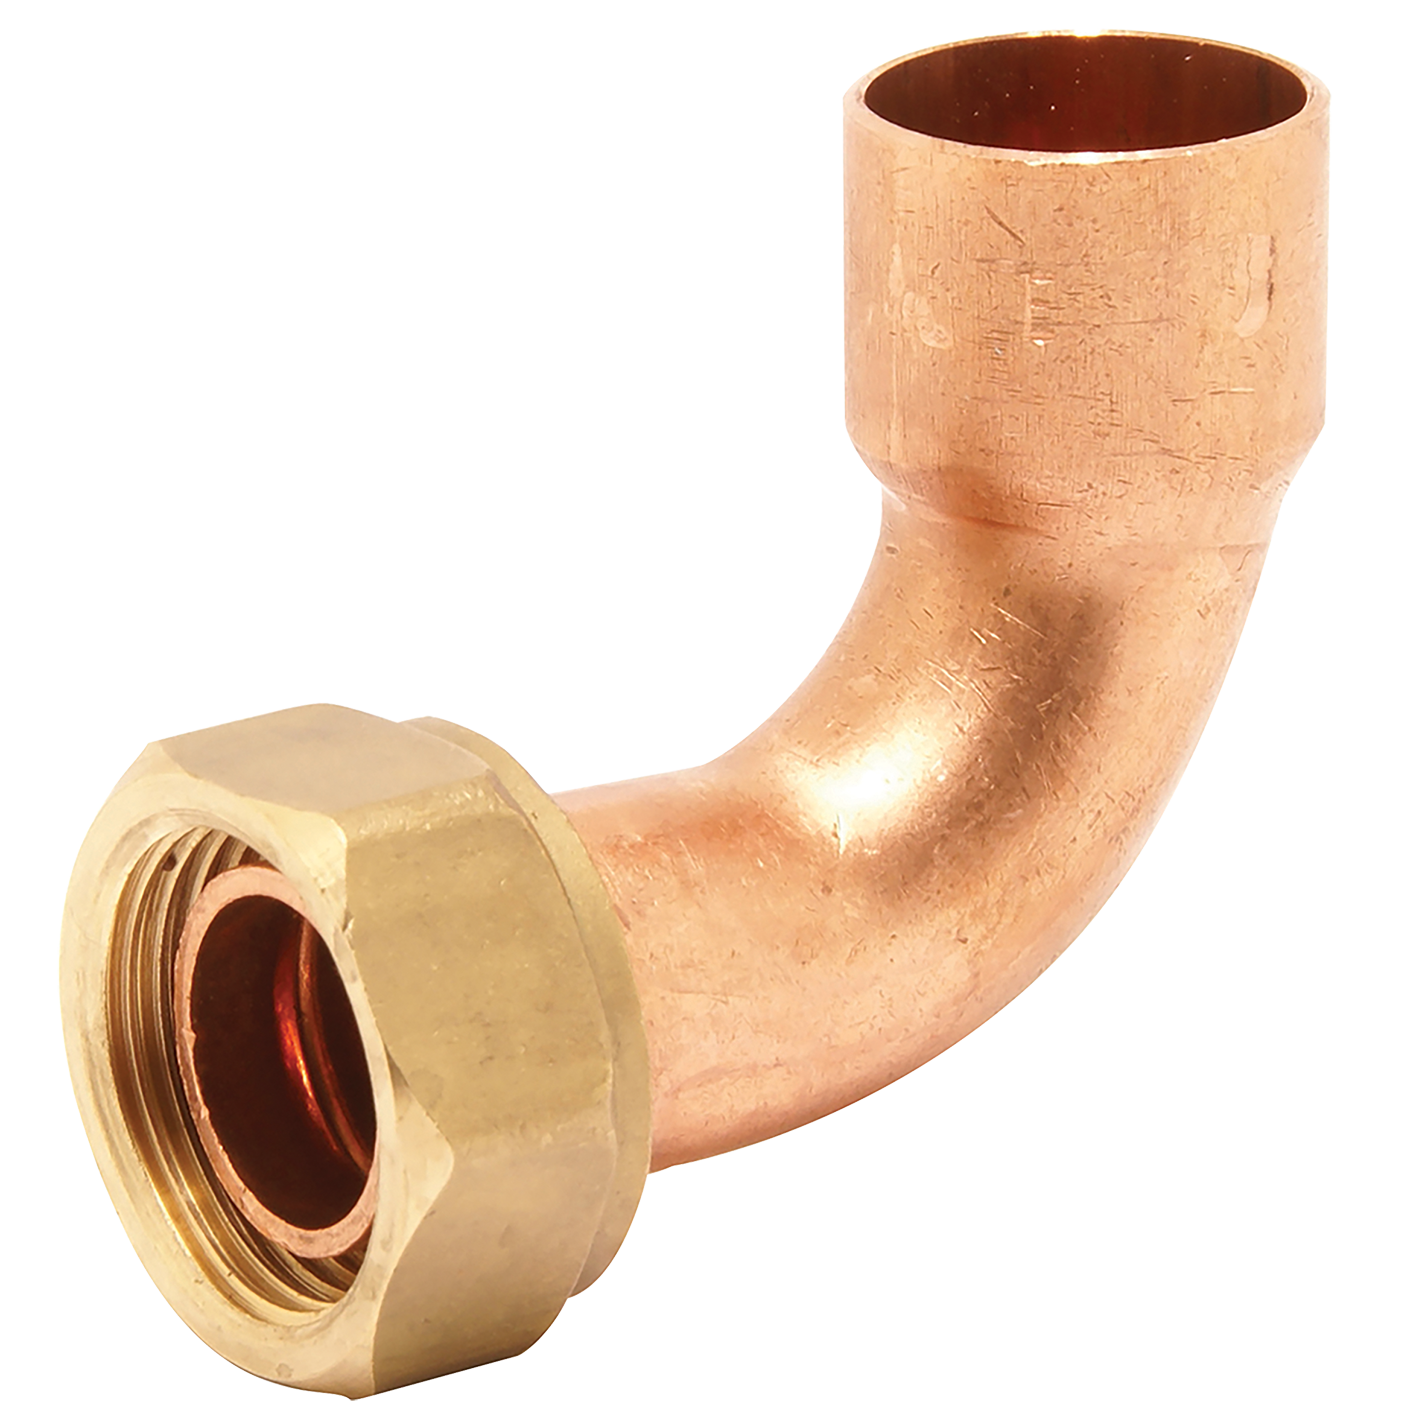 22MM X 3/4" END FEED BENT TAP CONN